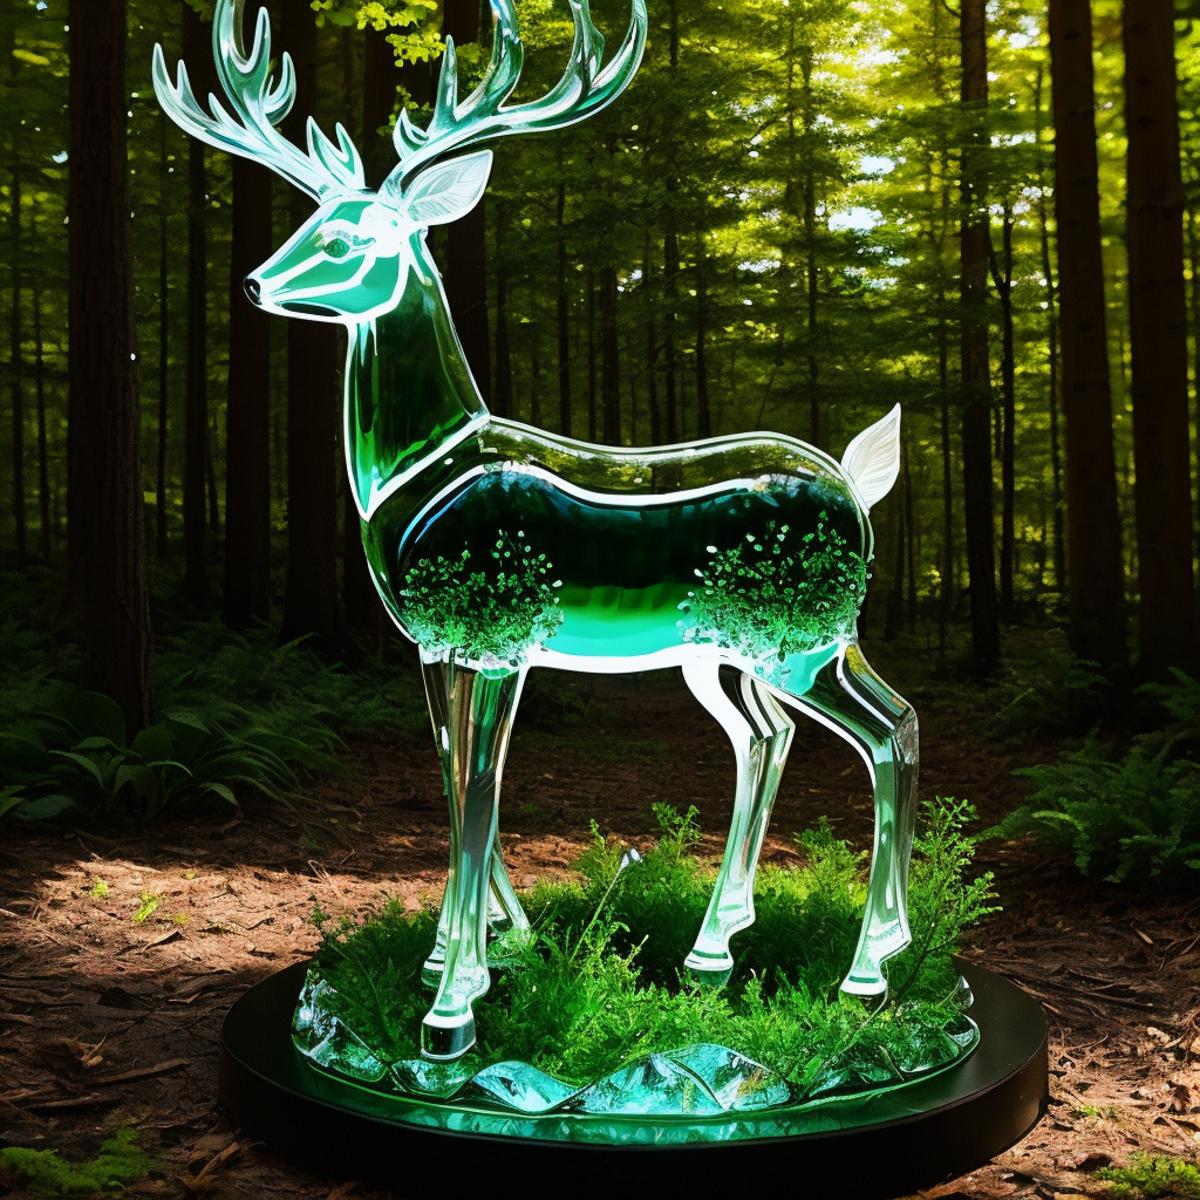 Glass Art and Glass Sculptures image by disori